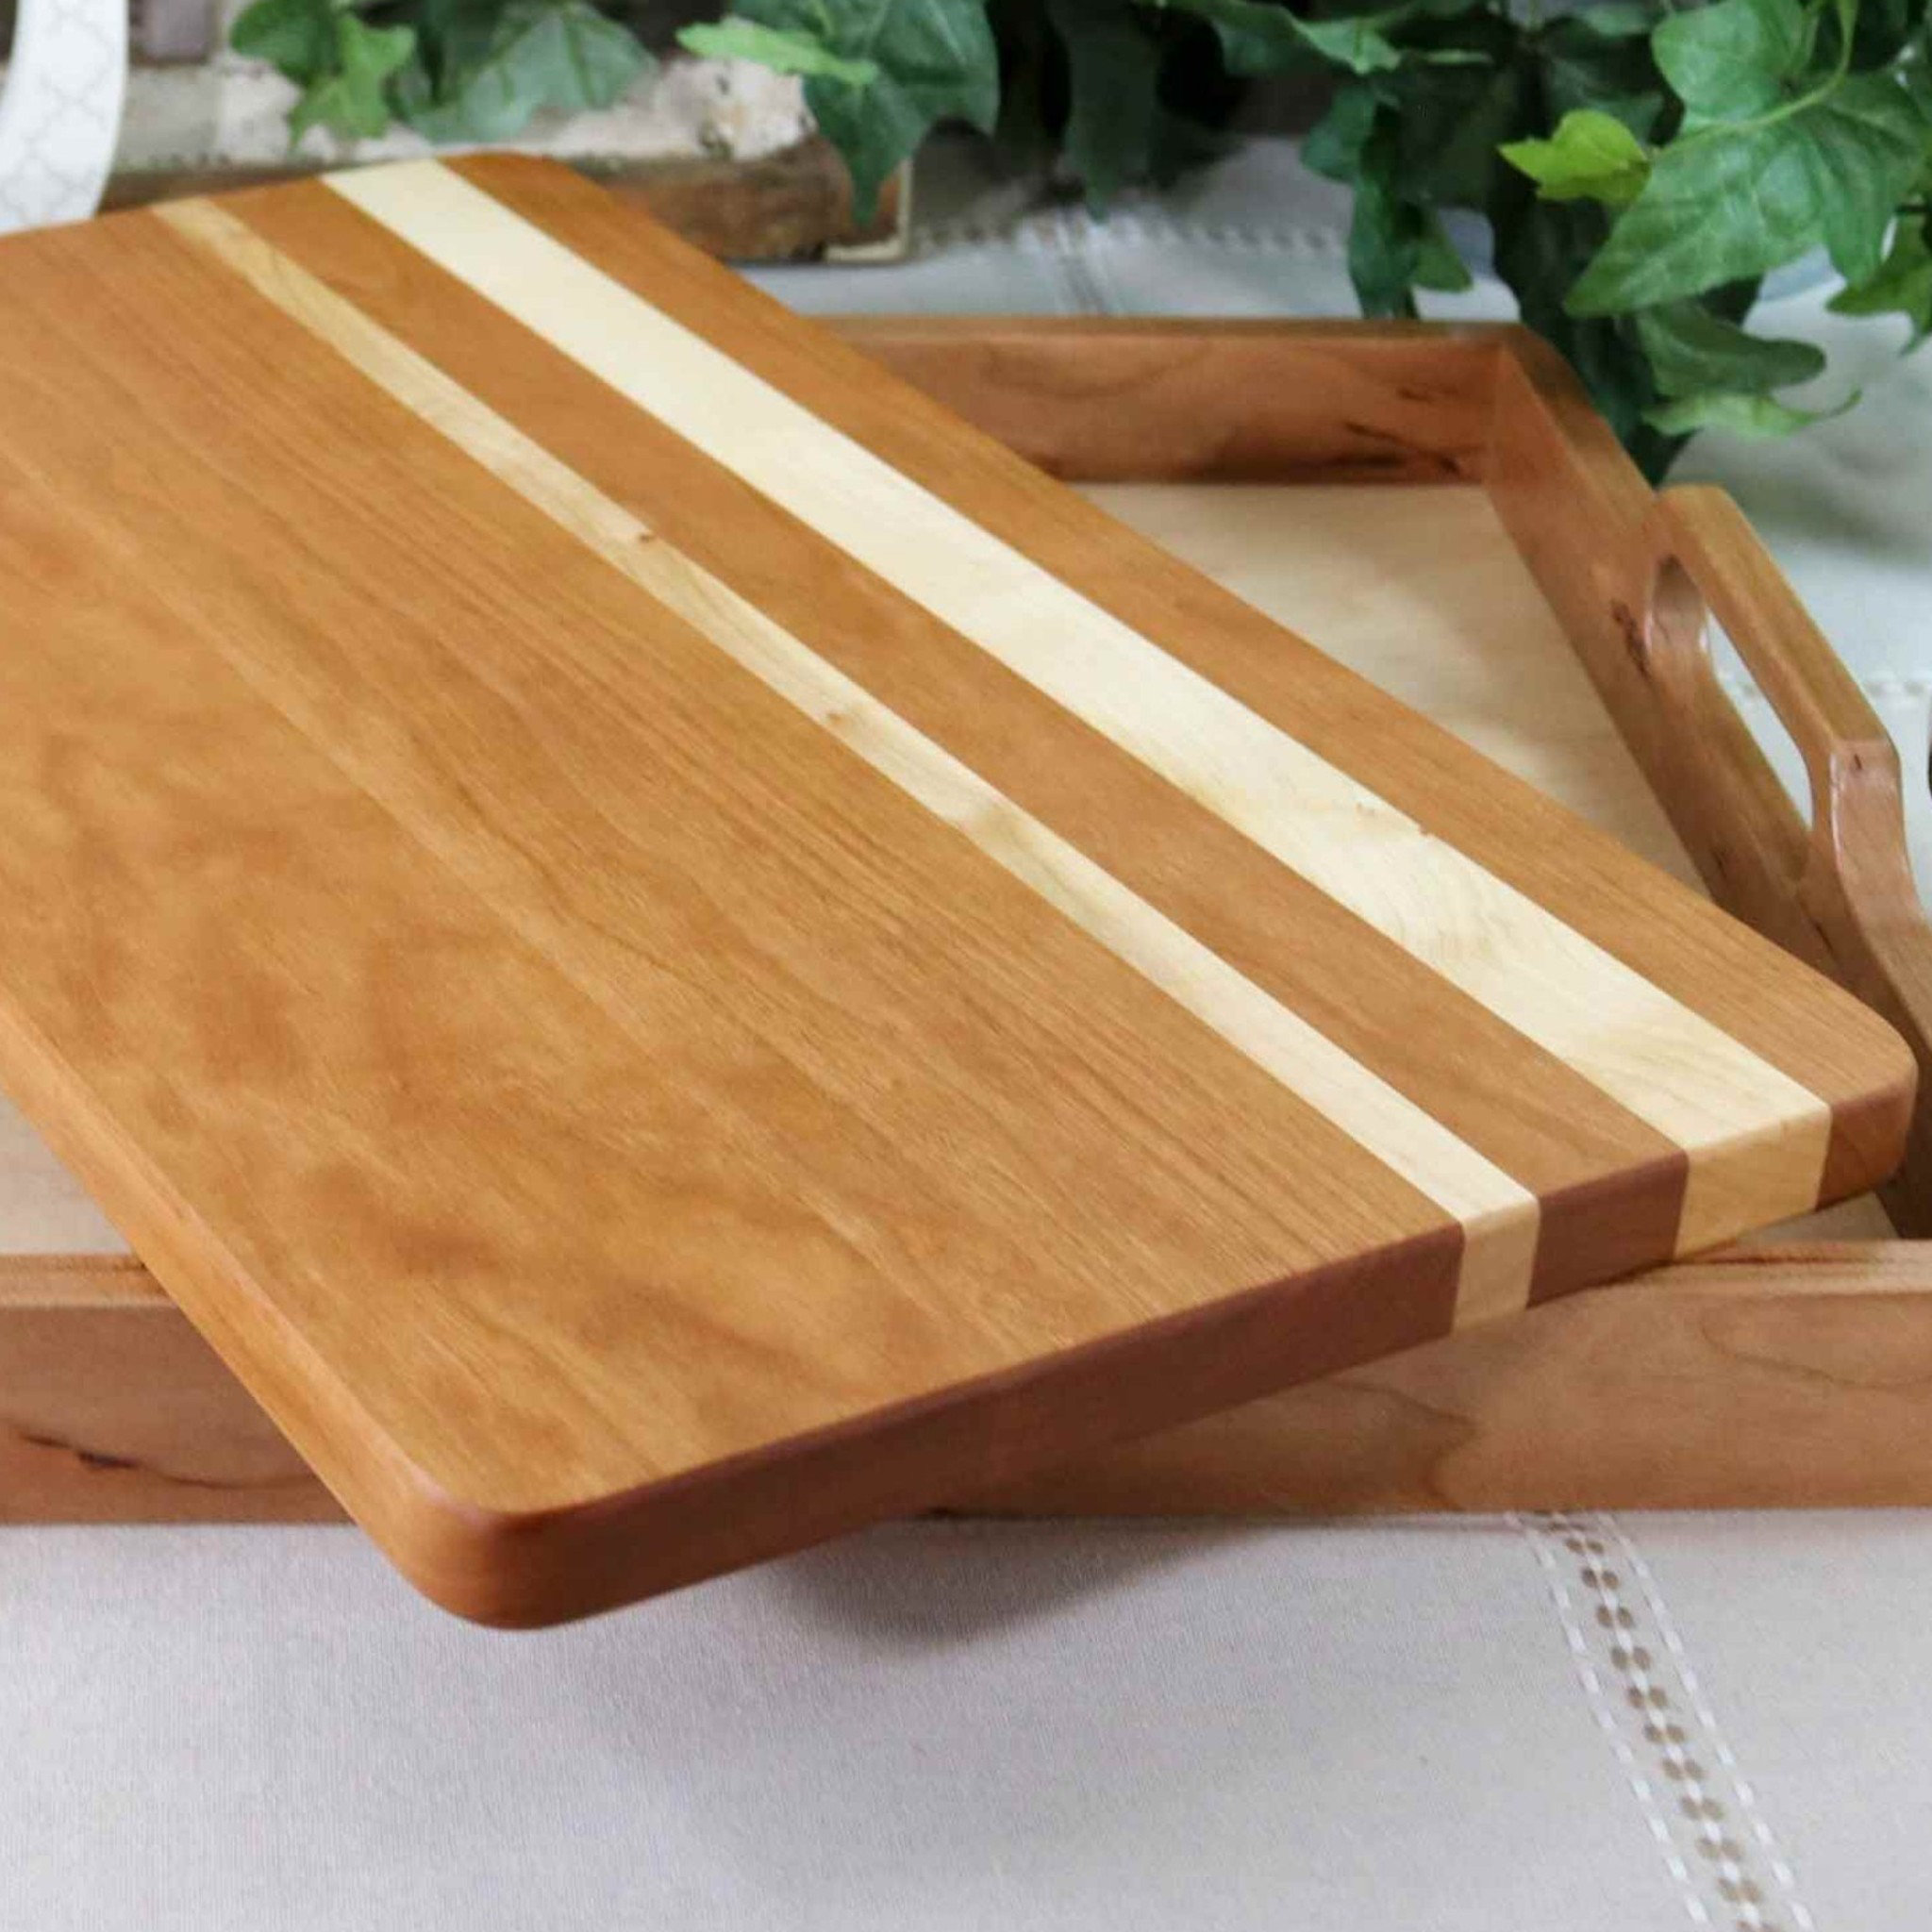 Wood Cutting Board With Handle - MAPLE